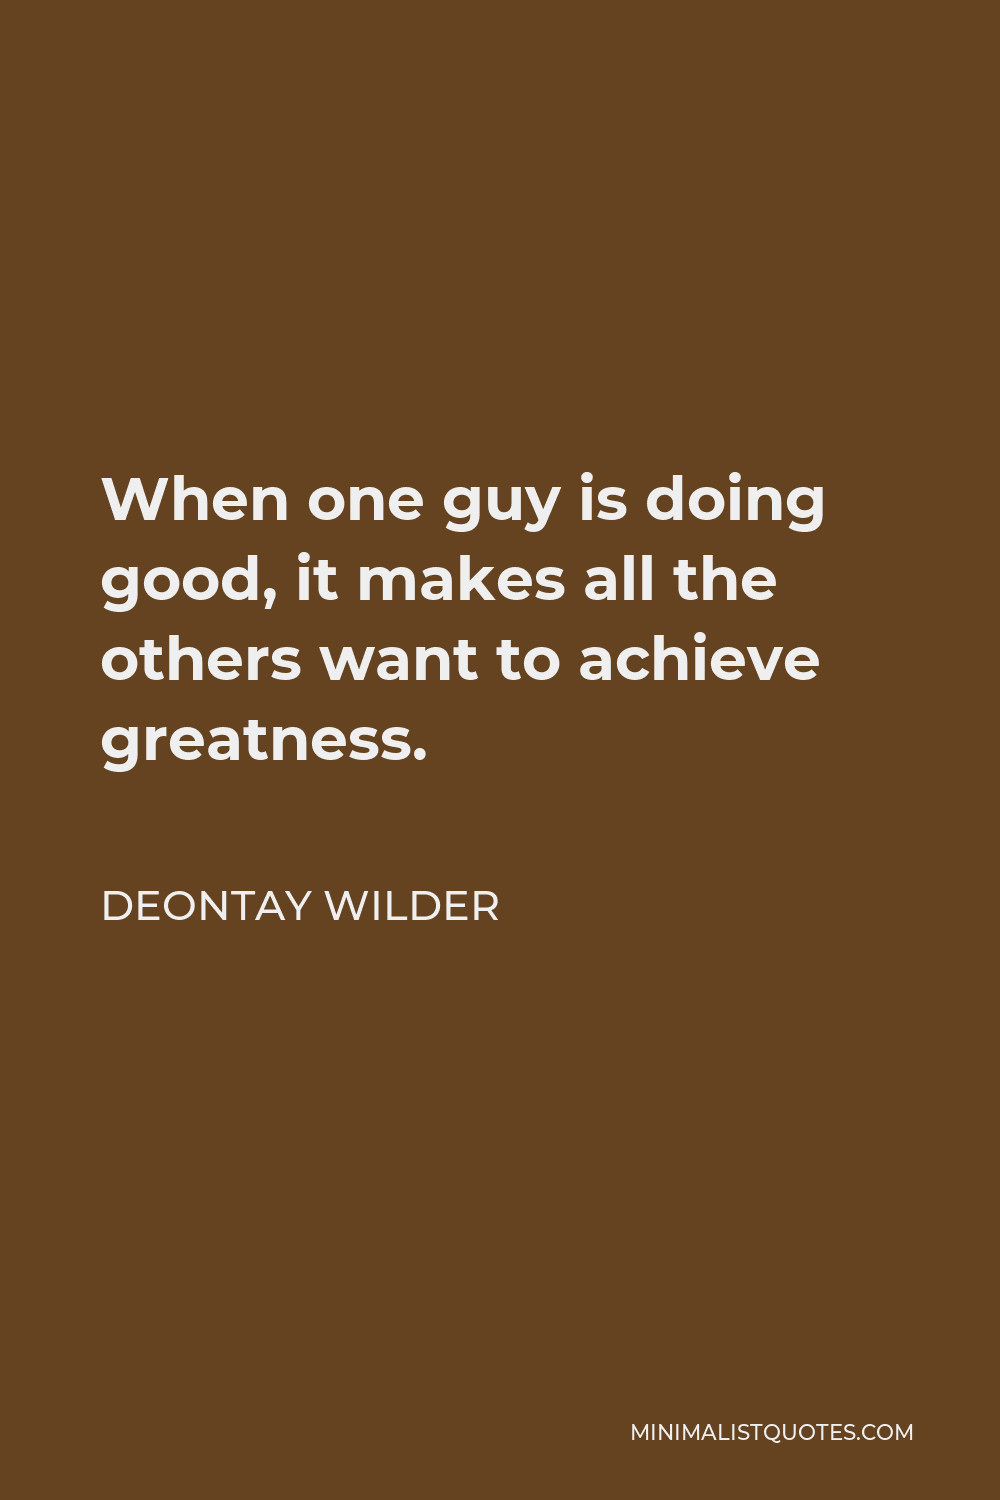 Deontay Wilder Quote - When one guy is doing good, it makes all the others want to achieve greatness.